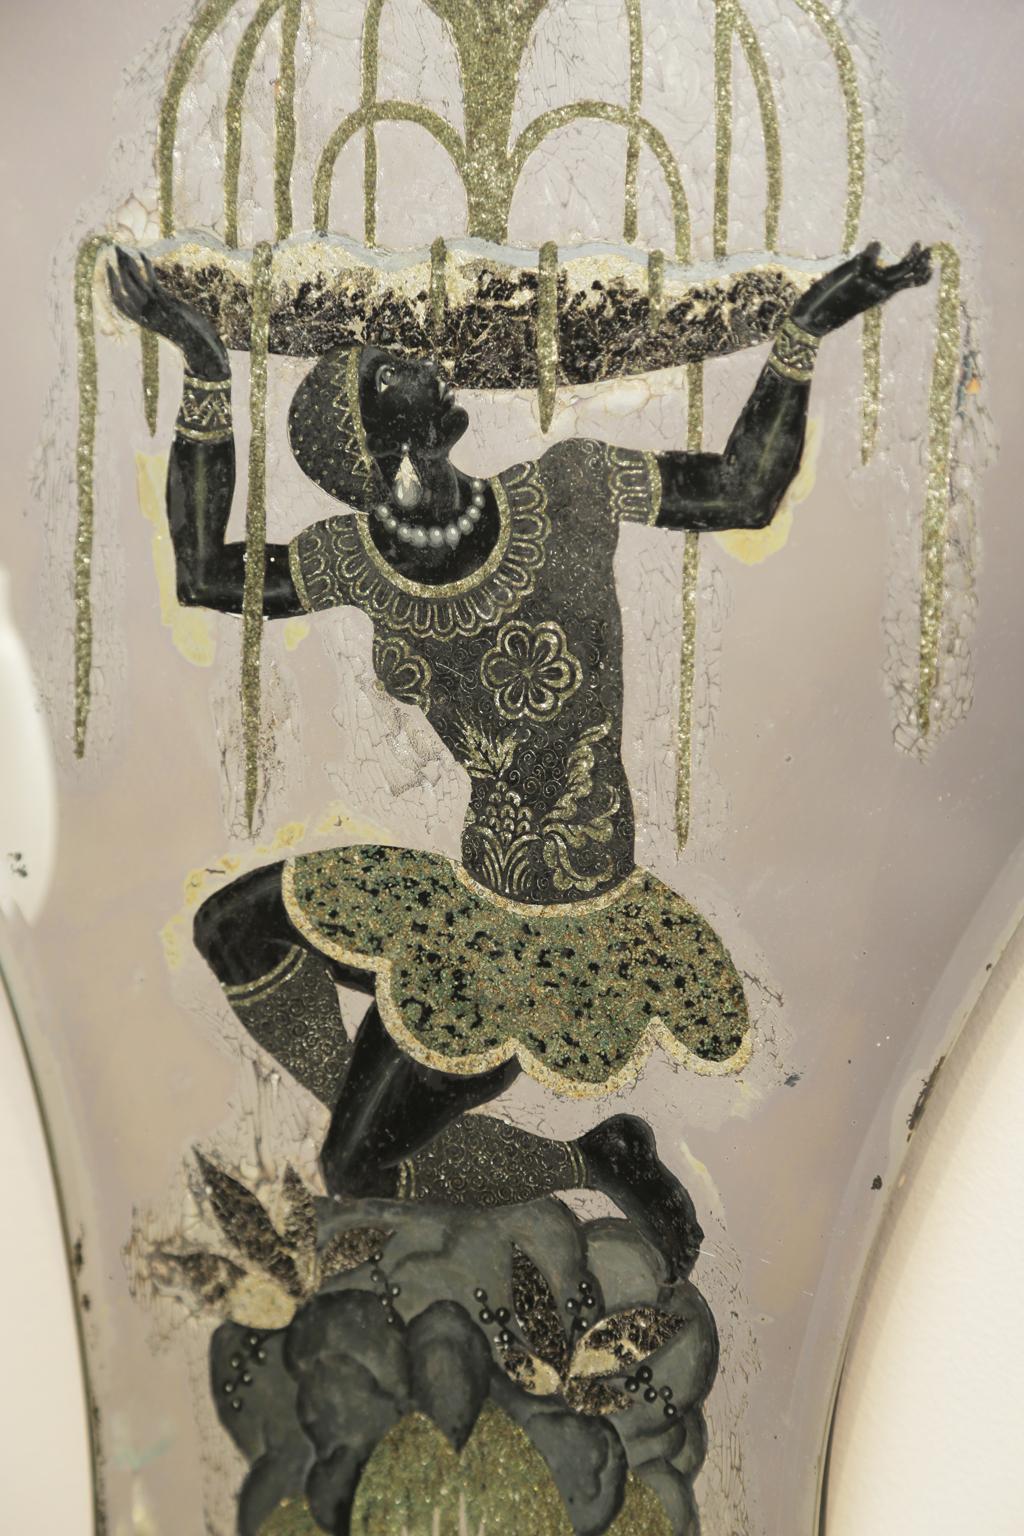 A right and left pair of sconces, each having a shield-shaped, mirrored backplate, reverse painted with Nubian figures, S-scroll candlearms, of brass, decorated with pendulum crystals. finished with palm accent below their electrified candles.